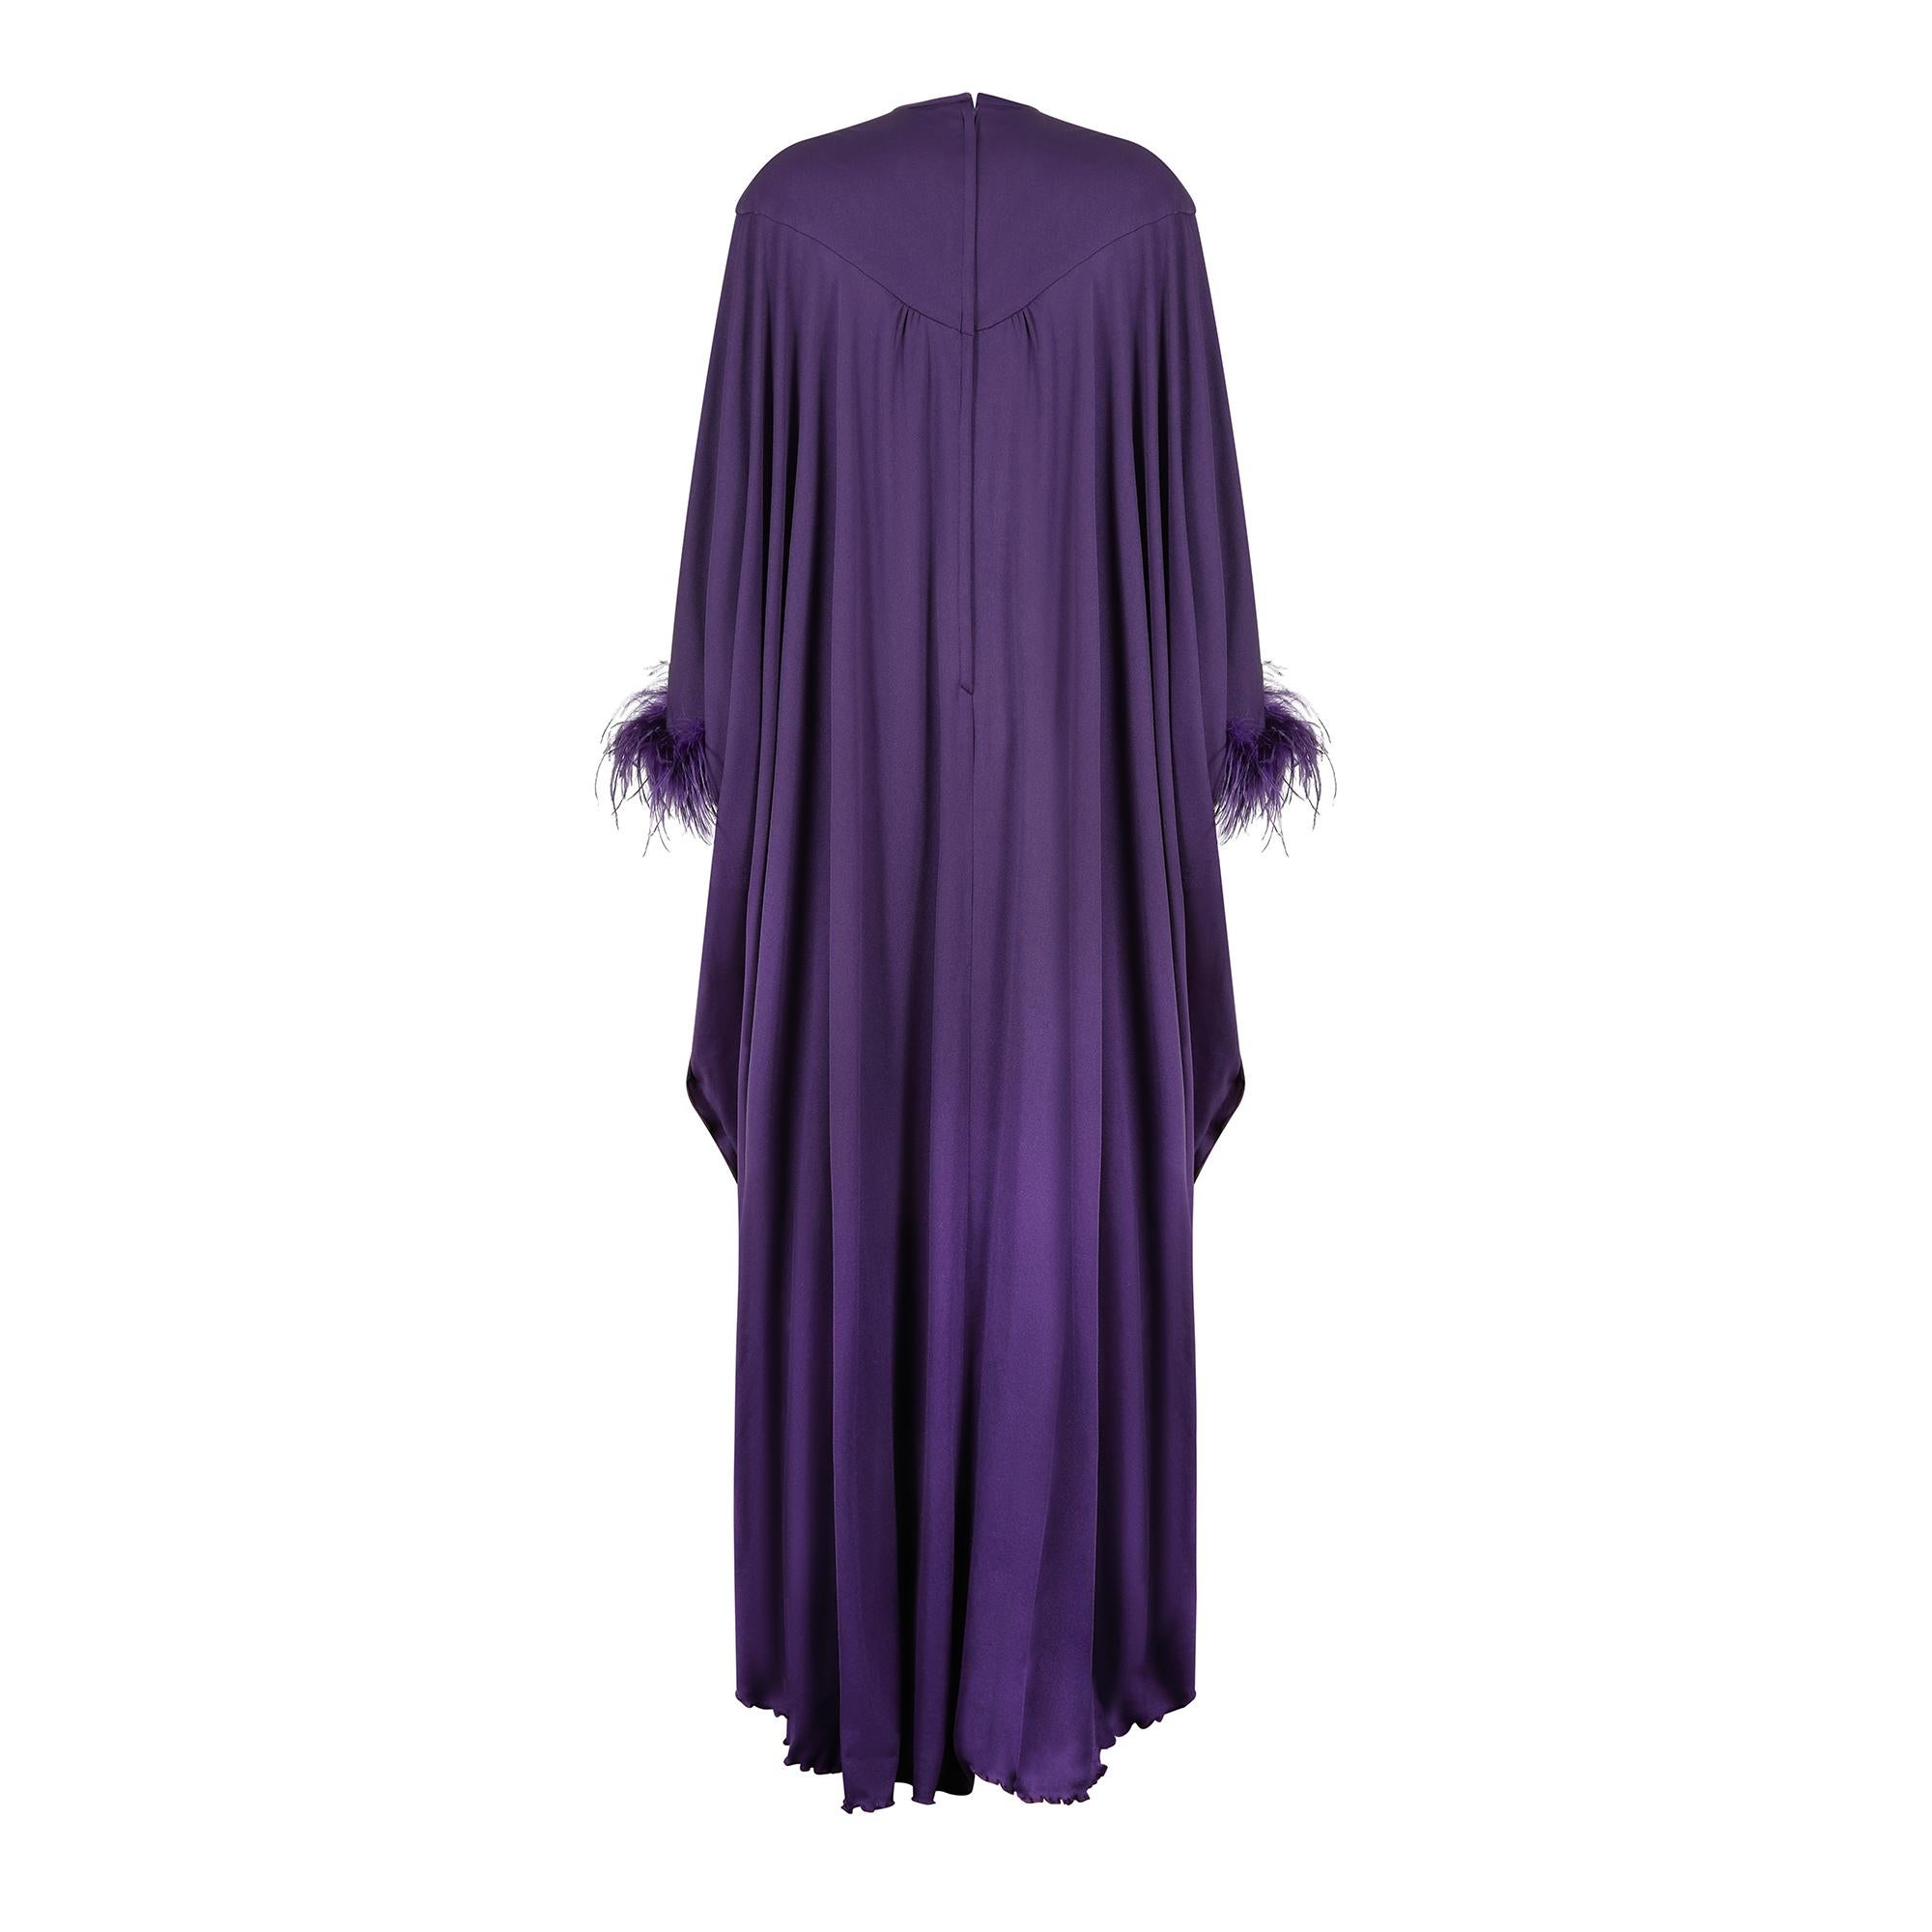 This is a very striking and good quality example of exuberant 1970s fashion from renowned occasion wear designer John Charles.  In a glorious shade of deep purple the dress has a deep yoke and high neck design with an oversized and wonderful trapeze